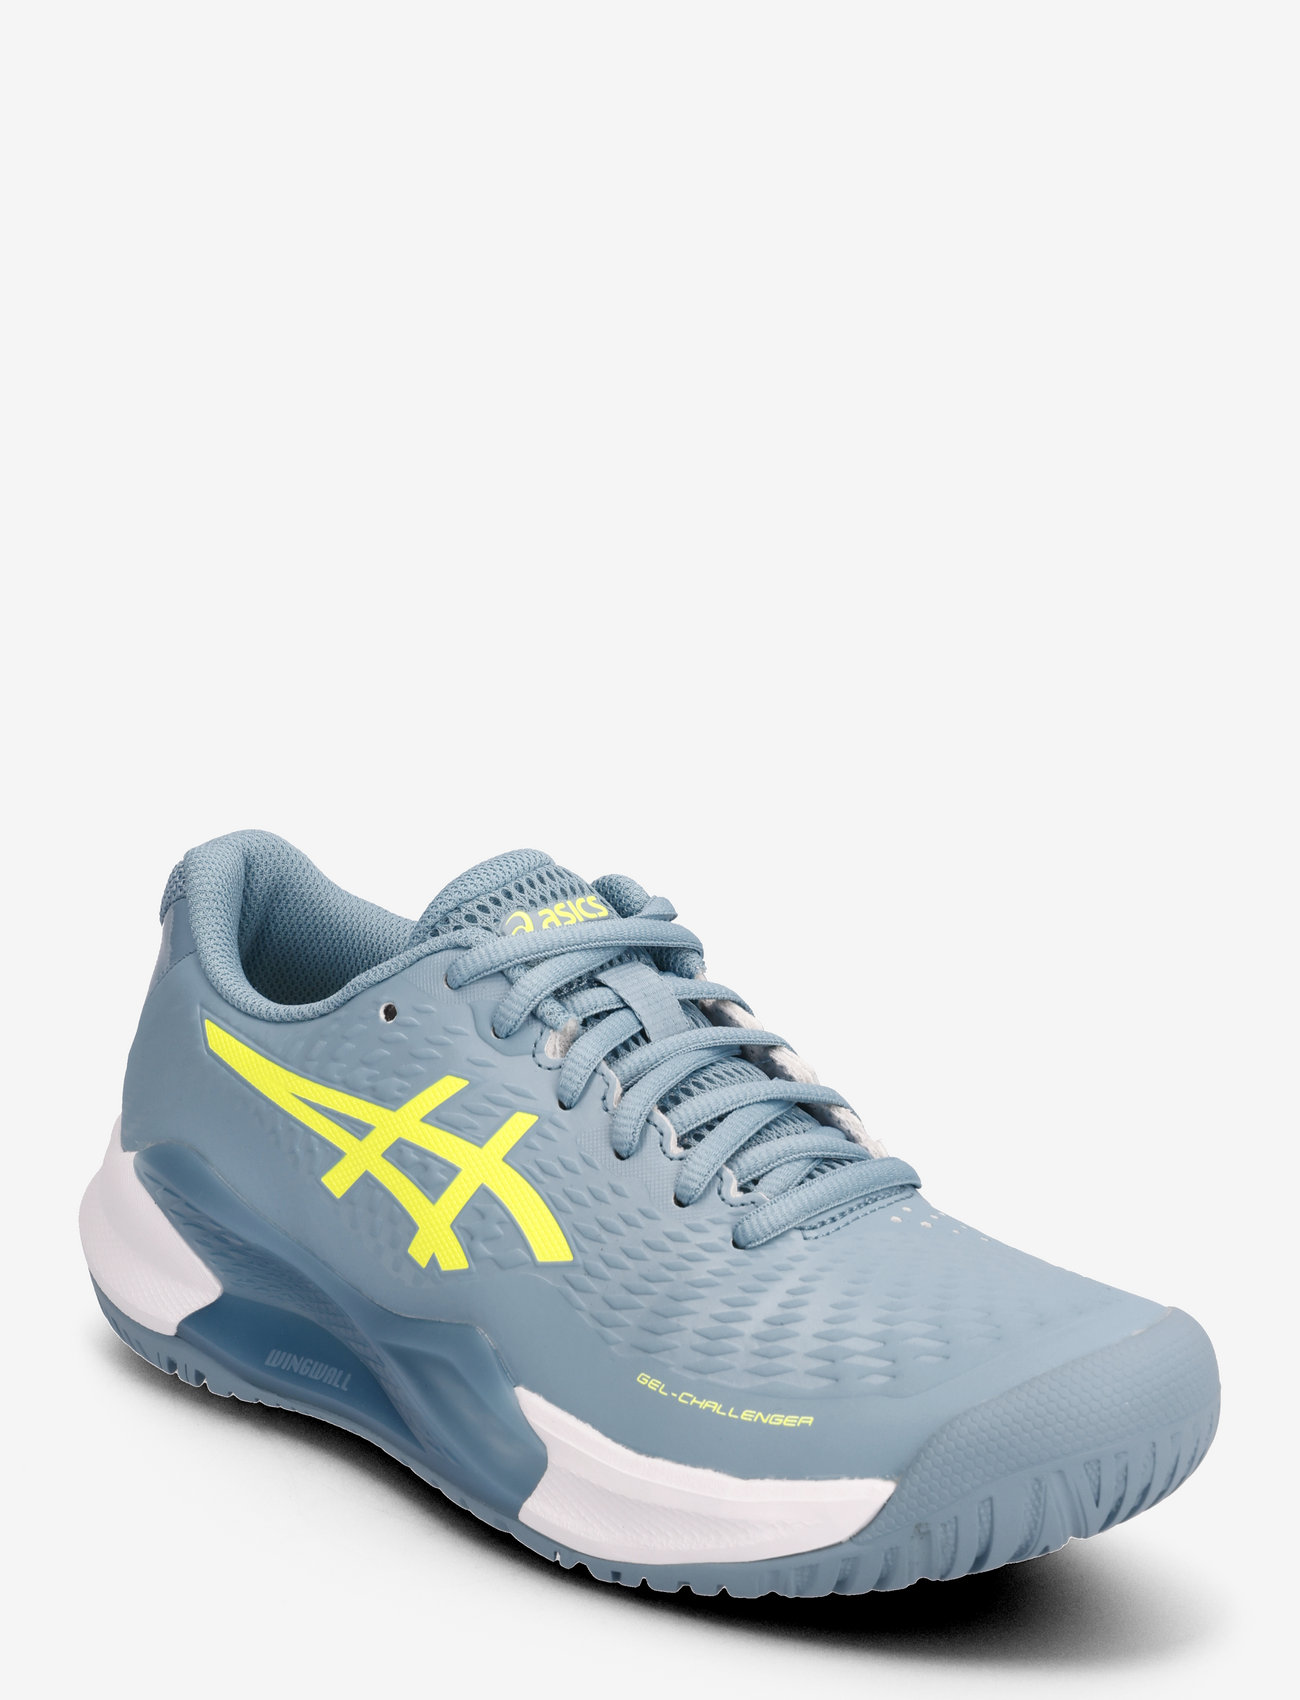 Asics - GEL-CHALLENGER 14 - racketsports shoes - gris blue/safety yellow - 0